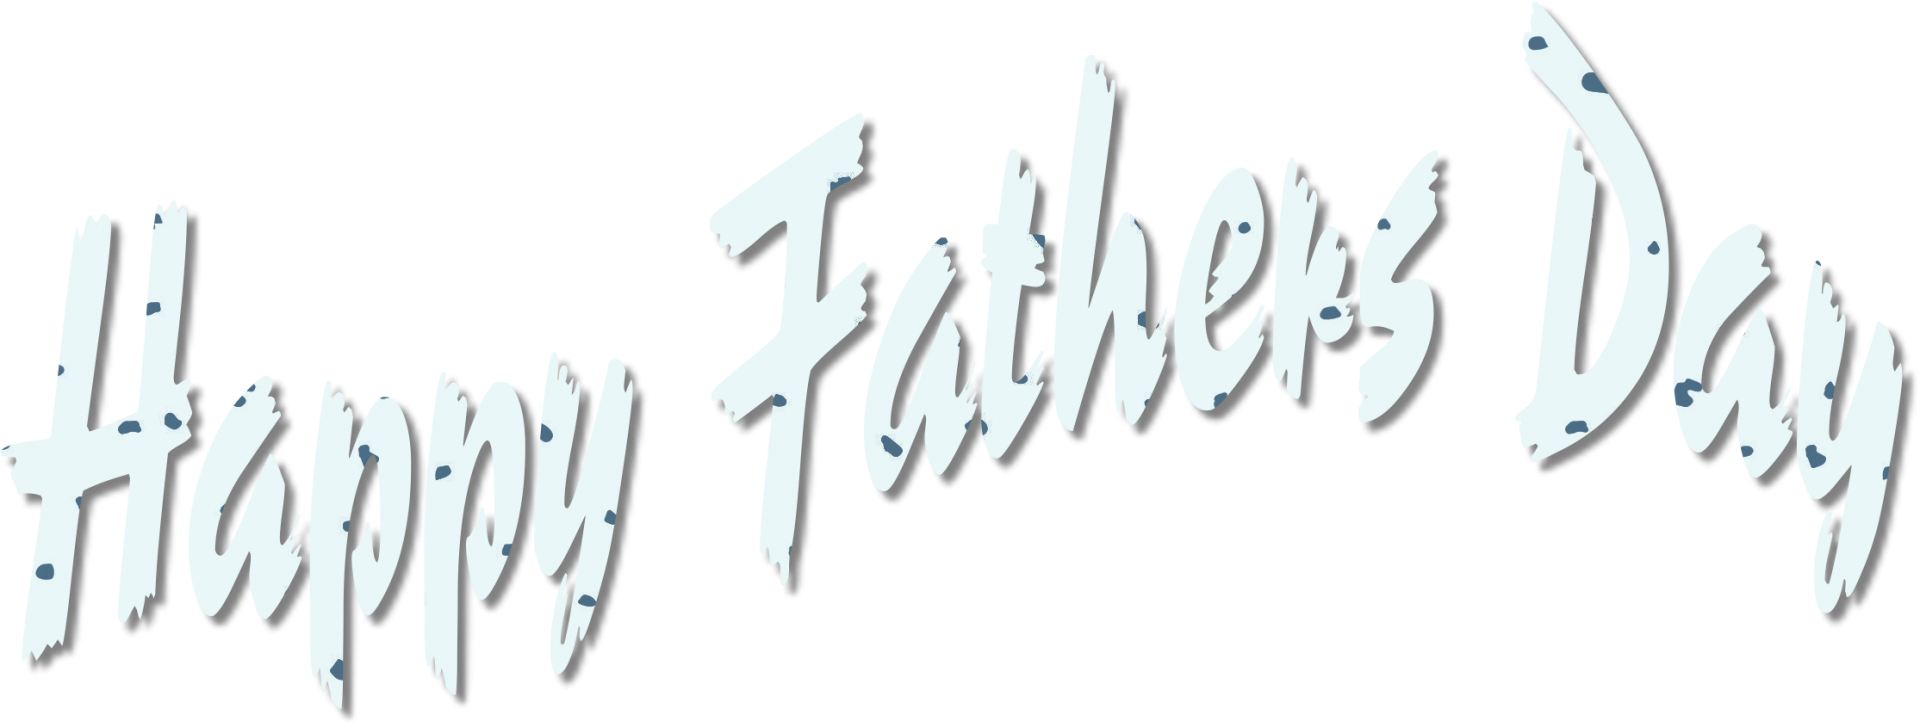 Happy Father S Day 19 4 Free Stock Photo Public Domain Pictures